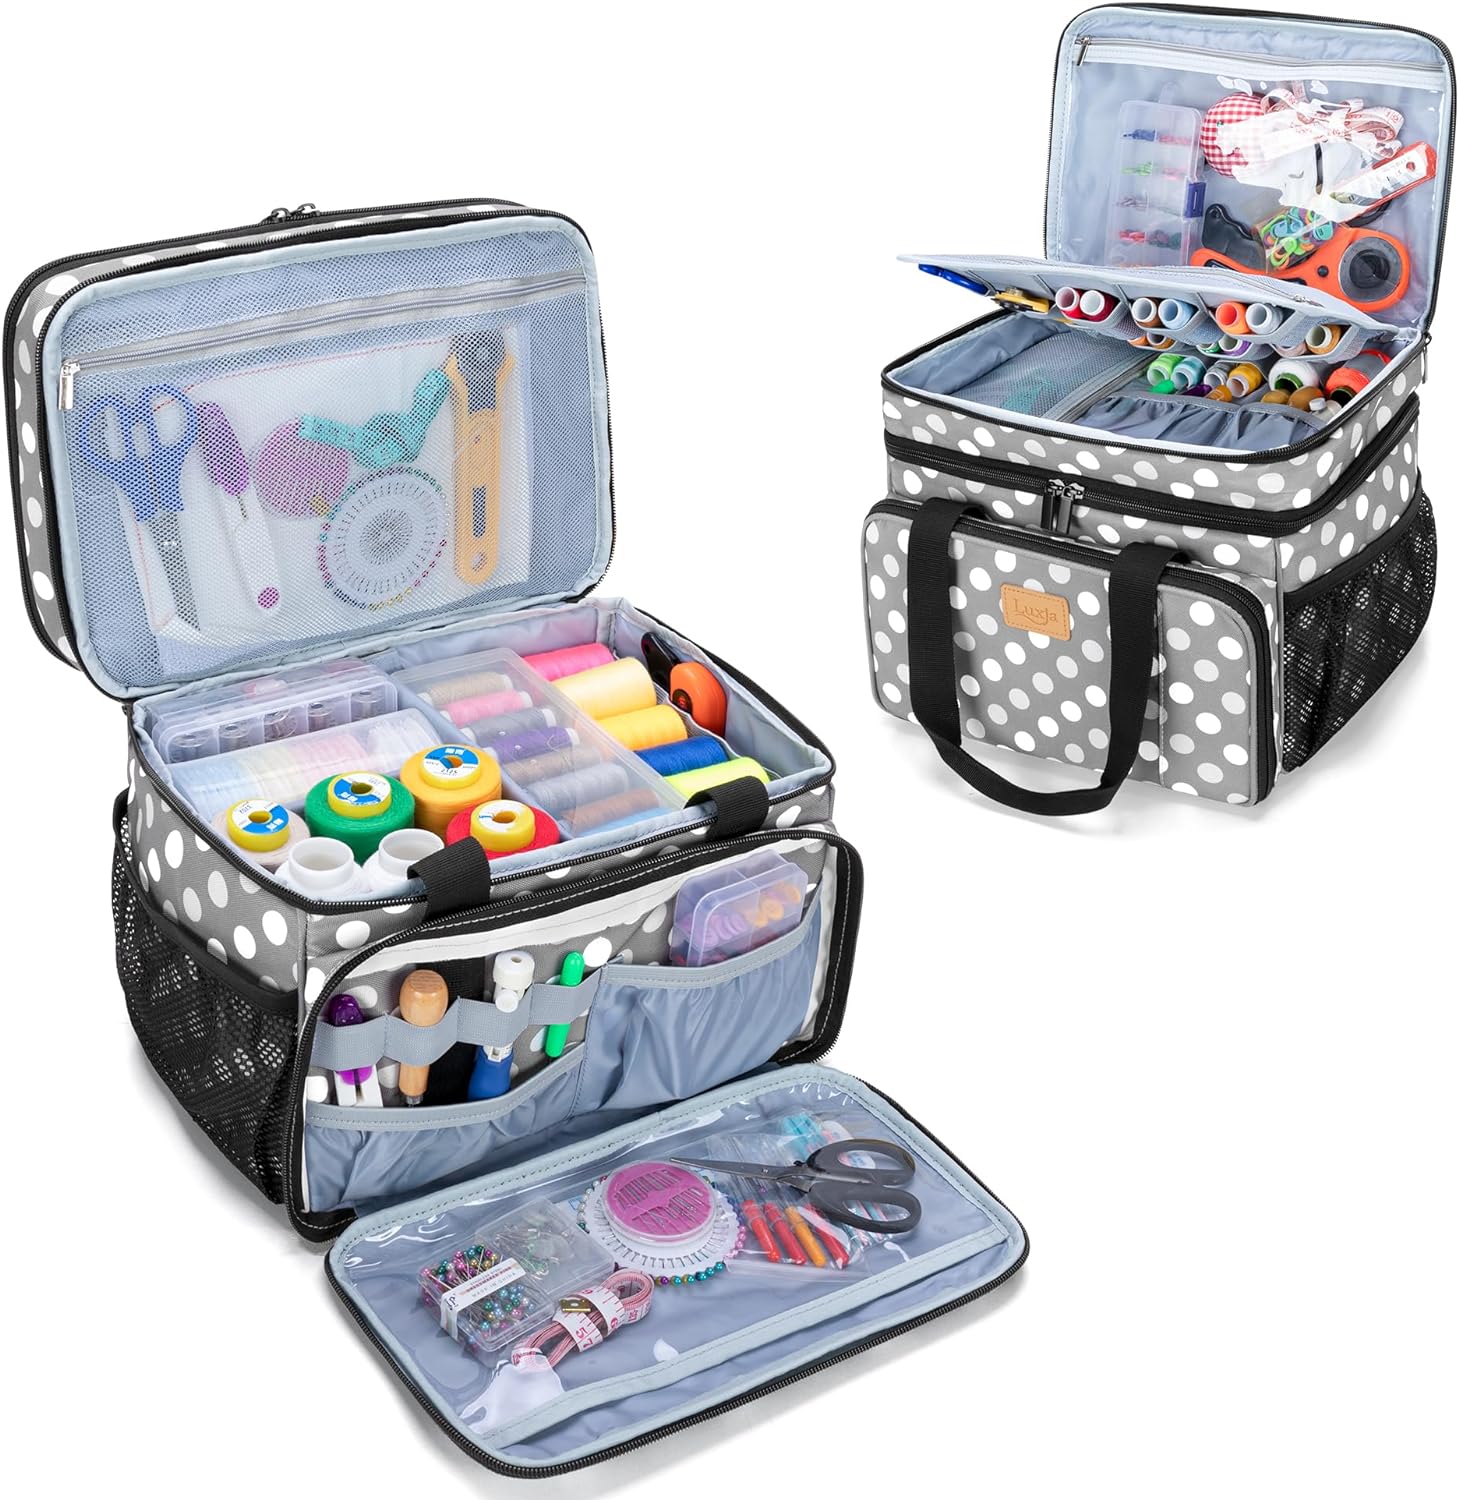 LUXJA Large Sewing Organizer with Many Compartments, 2 Layers Sewing Storage Bag with Varisized Pockets for Sewing and Crafting Supplies (Bag Only)